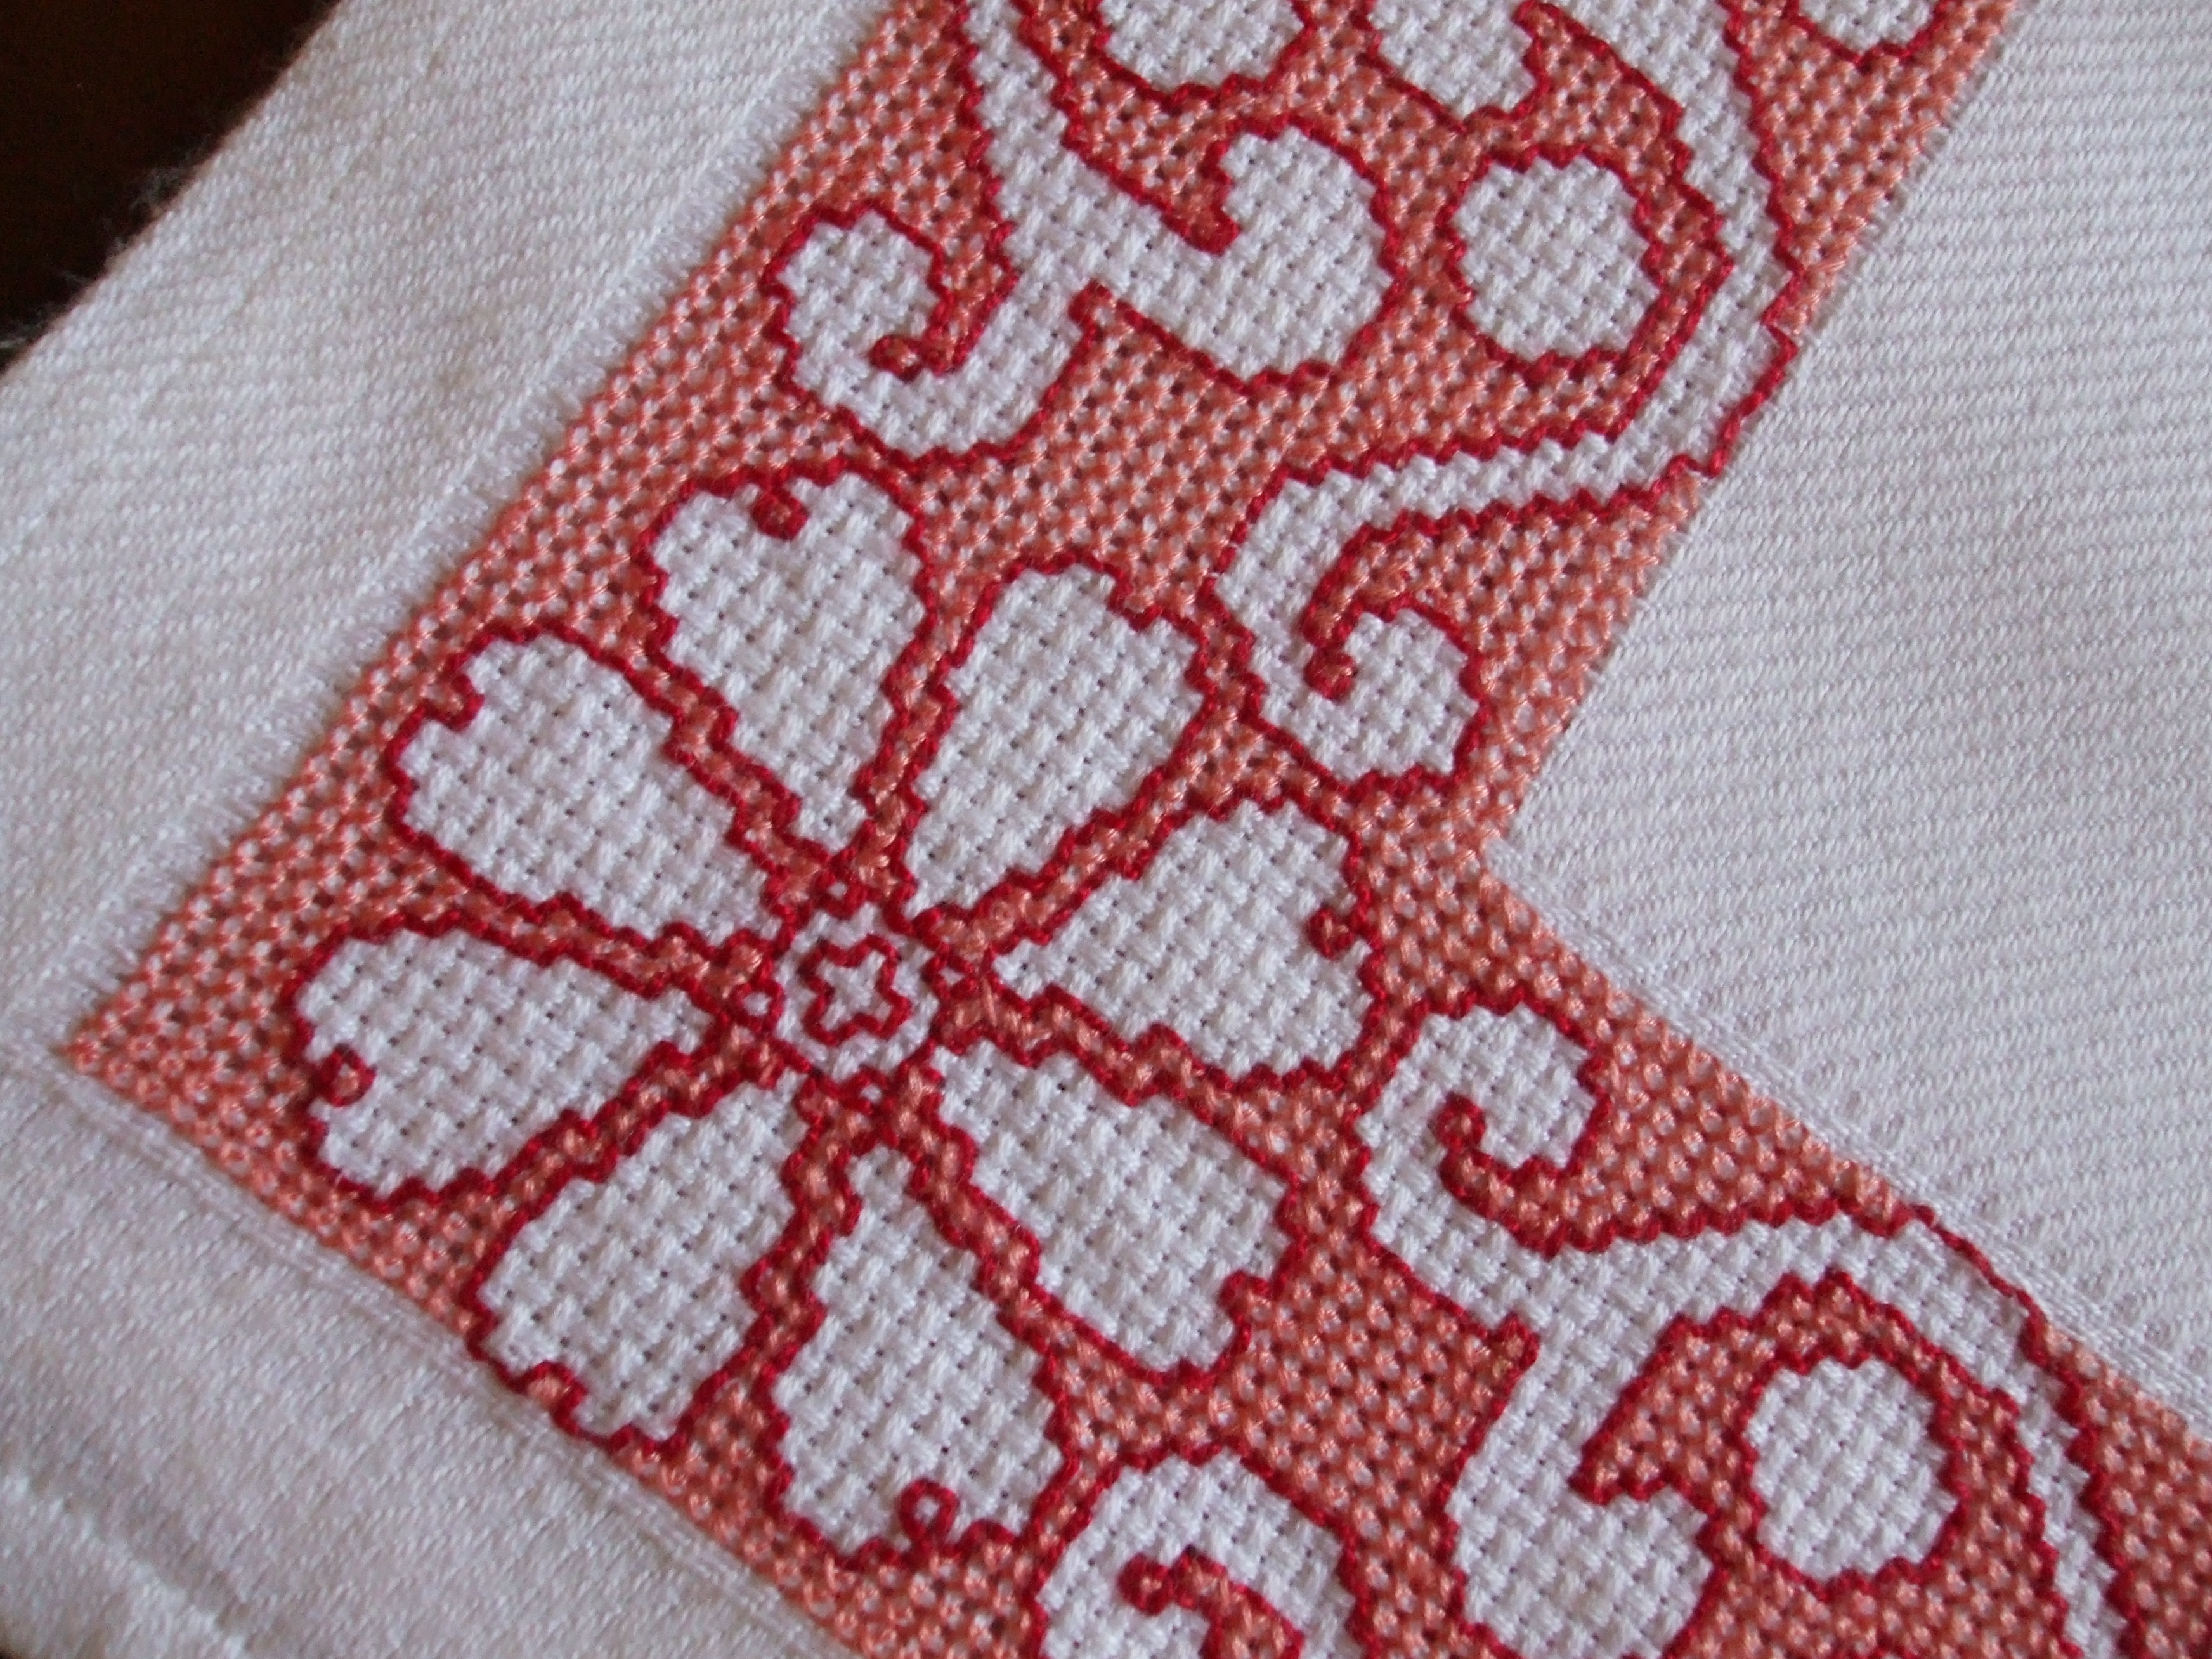 Embroidery Stitches - Stitching Cow